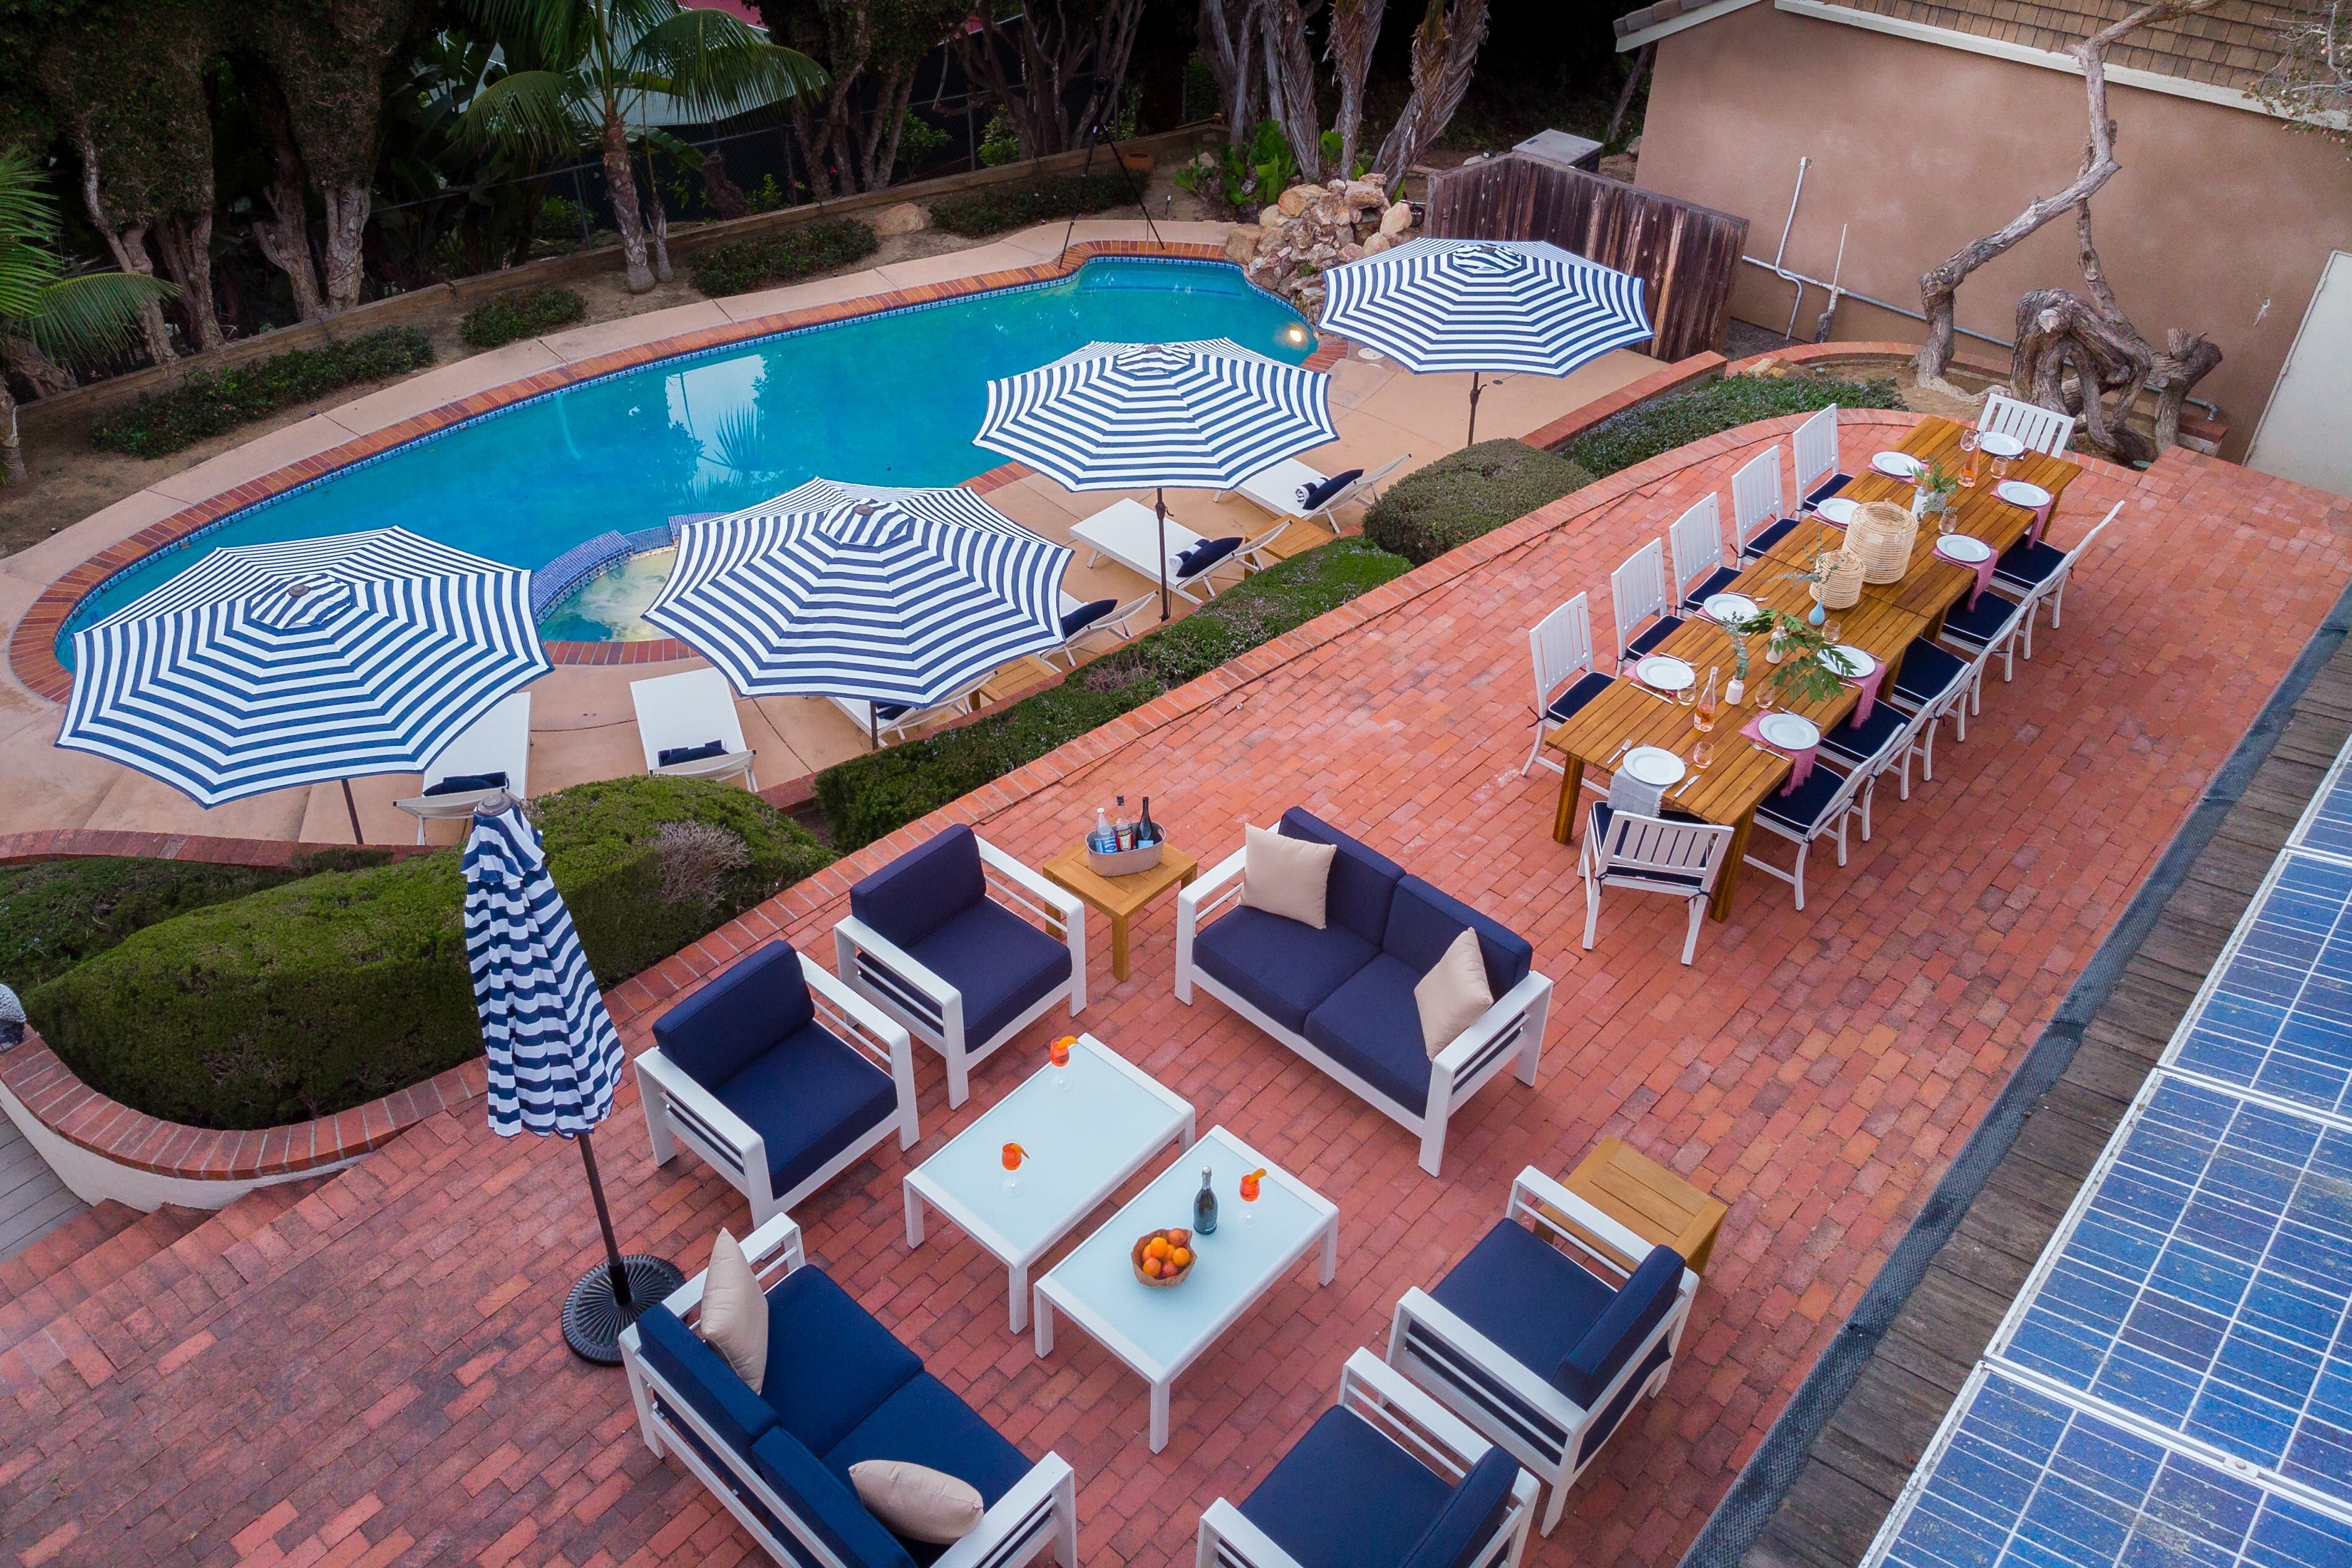 Perfect place to entertain on the spacious patio.